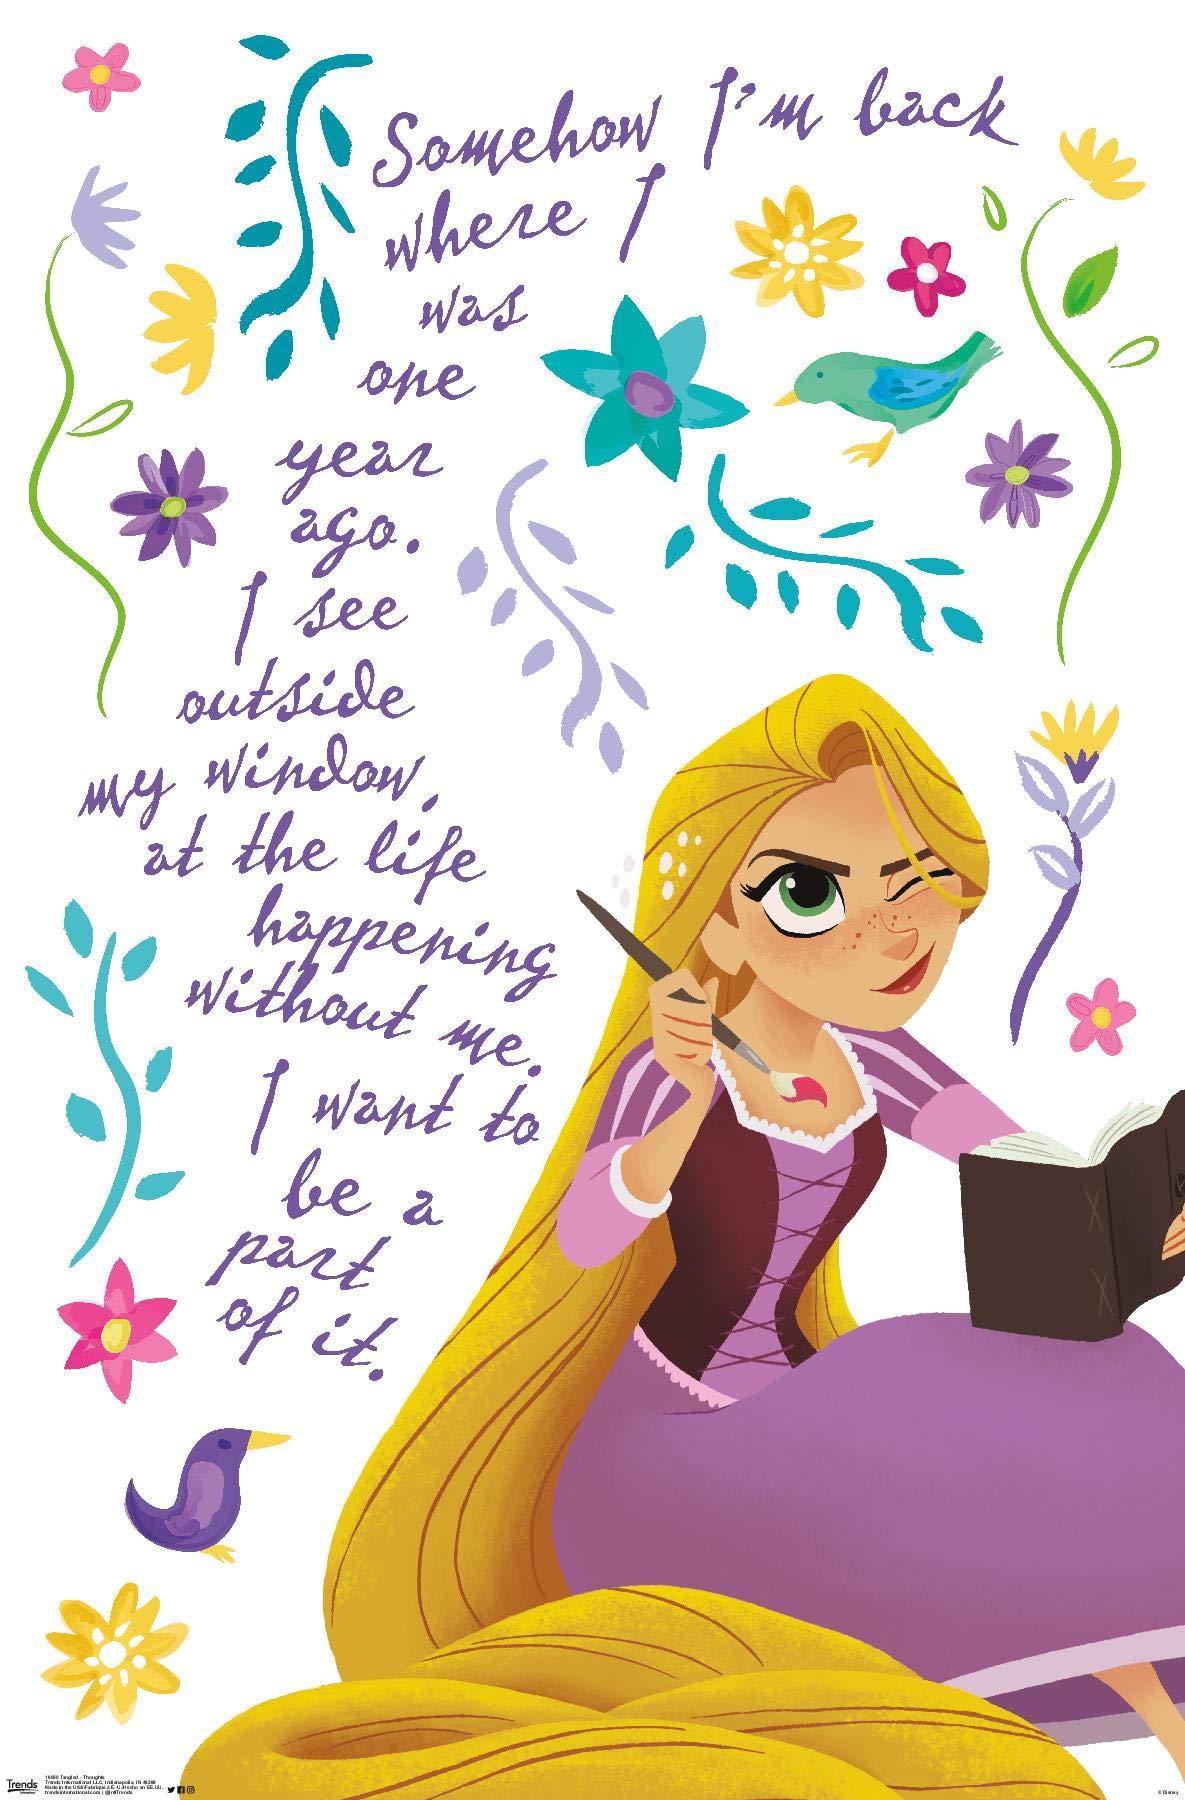 A poster of Rapunzel from Tangled reading a book with a quote from the movie. - Rapunzel